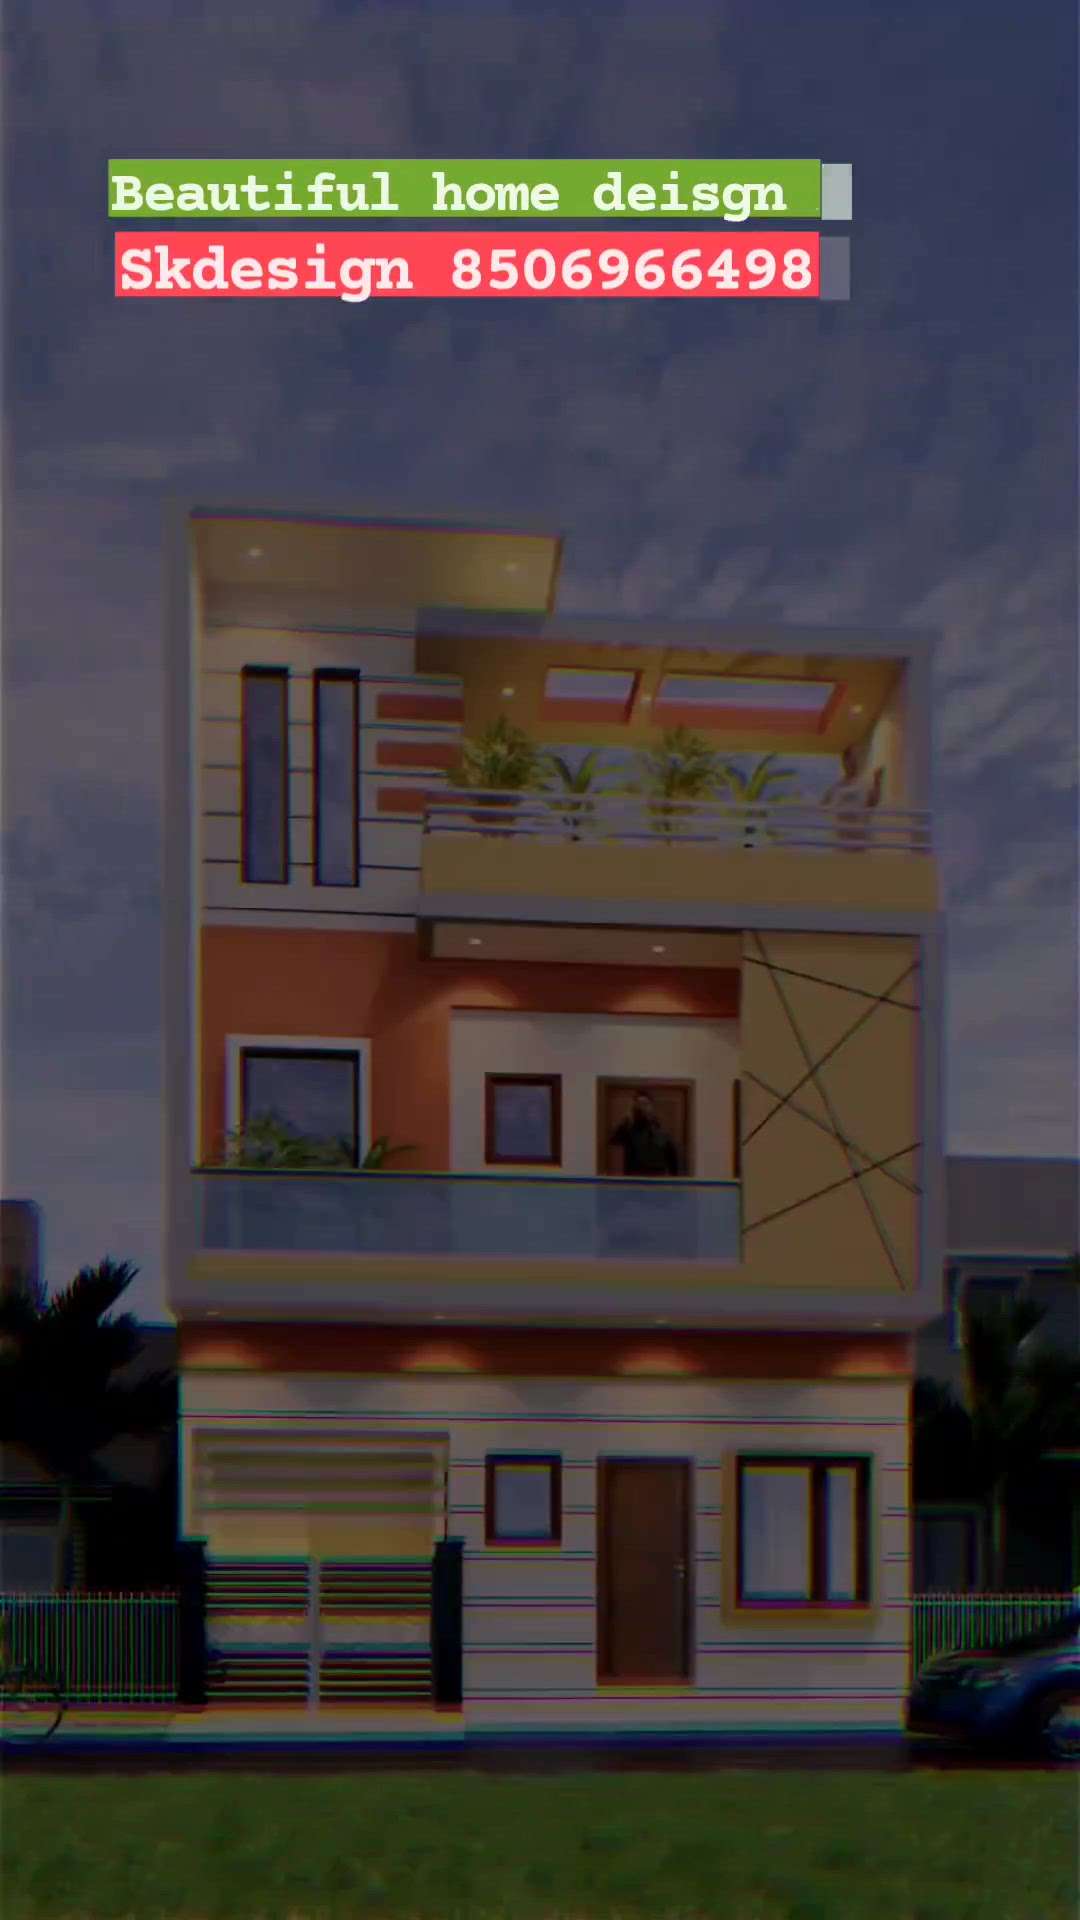 Hi everyone ! Today I want Sharing Modern House Design 2 Storey.
Modern House Design  With 4 Bedrooms, 2 Bathrooms, 2 drawing room.
House Size : 23feet x 38feet

3D Exterior interior Presentation of a Modern house design 
Total Floor : 320sqm
Lot area : 23feet x 38feet(874sqft.)

---------------------------🏡 -------------------------------
This House Plan : 
  ⁕ Ground Floor 
       - 2Car parking
       - Living Area
       - Dining Area
       - Kitchen 
       - 2 Bedroom
       - 1 Bathroom
       
  ⁕ First Floor
       - Living Area
       - Dining Area
       - Kitchen 
       - 2 Bedroom
       - 1 Bathroom
       - Balcony

  ⁕ Roof Floor
---------------------------🏡 -------------------------------  
 
ESTIMATED COST:
From $ 30lac - 35lac
Price may vary depending on the location.

---------------------------
Modern home design India
Modern home Design Front
Small Modern House design
Simple modern house design
Modern home design exterior
Modern exterior wall design

Instagram